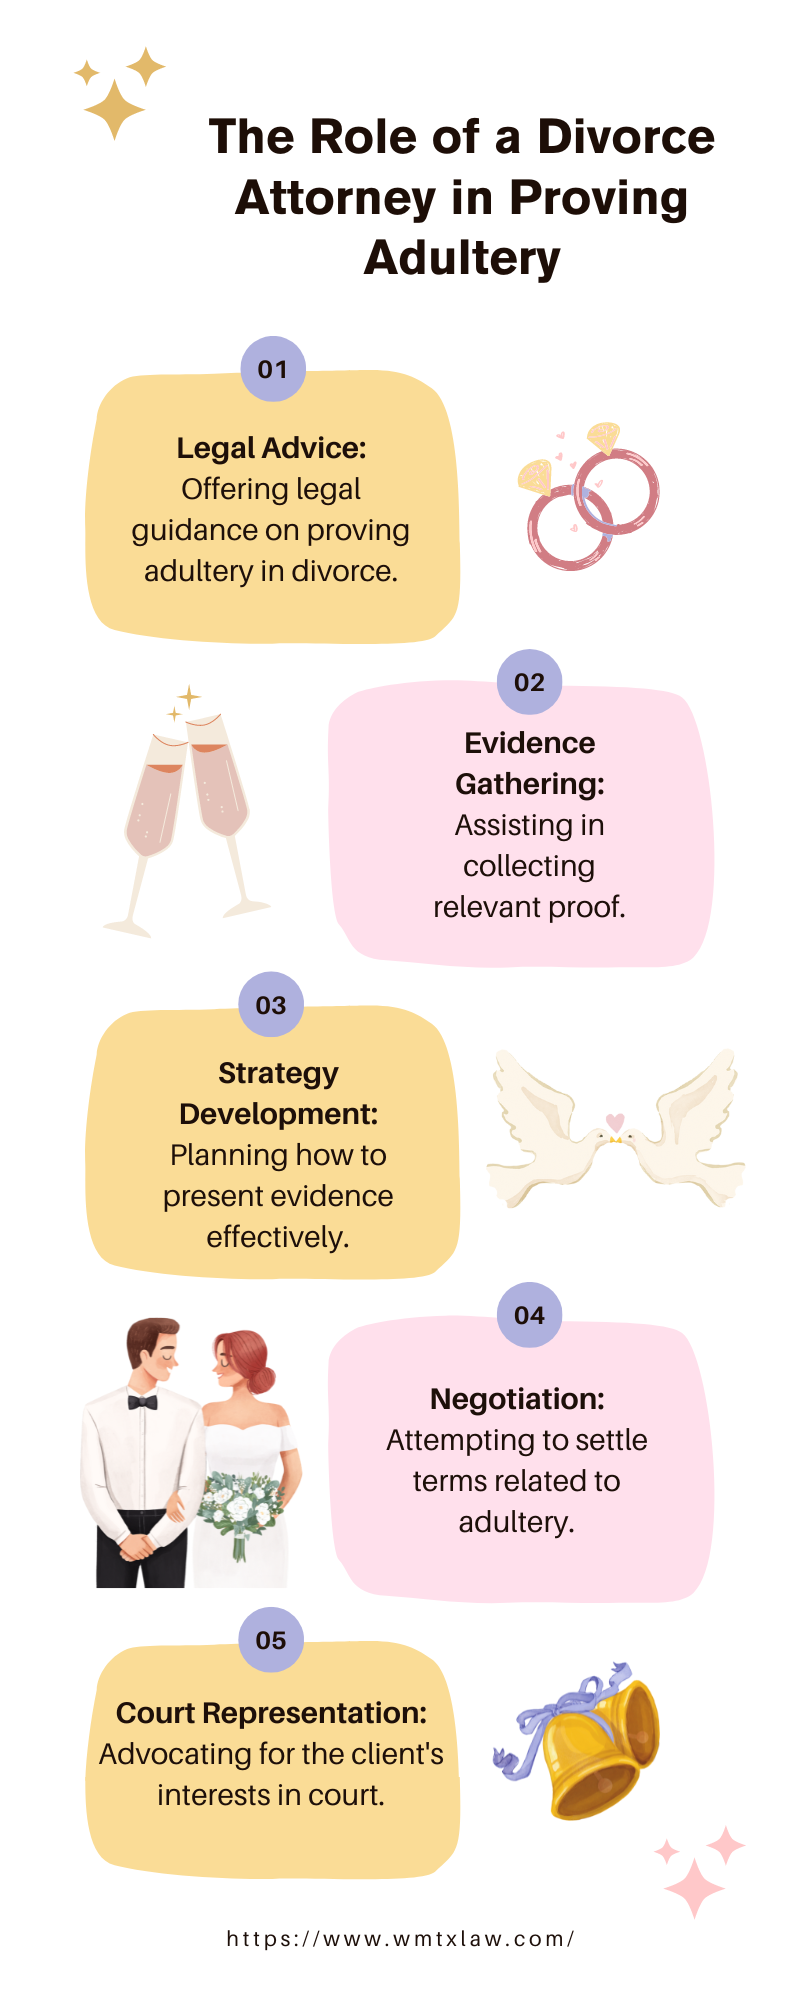 Infographic titled "The Role of a Divorce Attorney in Proving Adultery" listing five roles: Legal Advice, Evidence Gathering, Strategy Development, Negotiation, and Court Representation in cases of cheating for favorable divorce settlements.